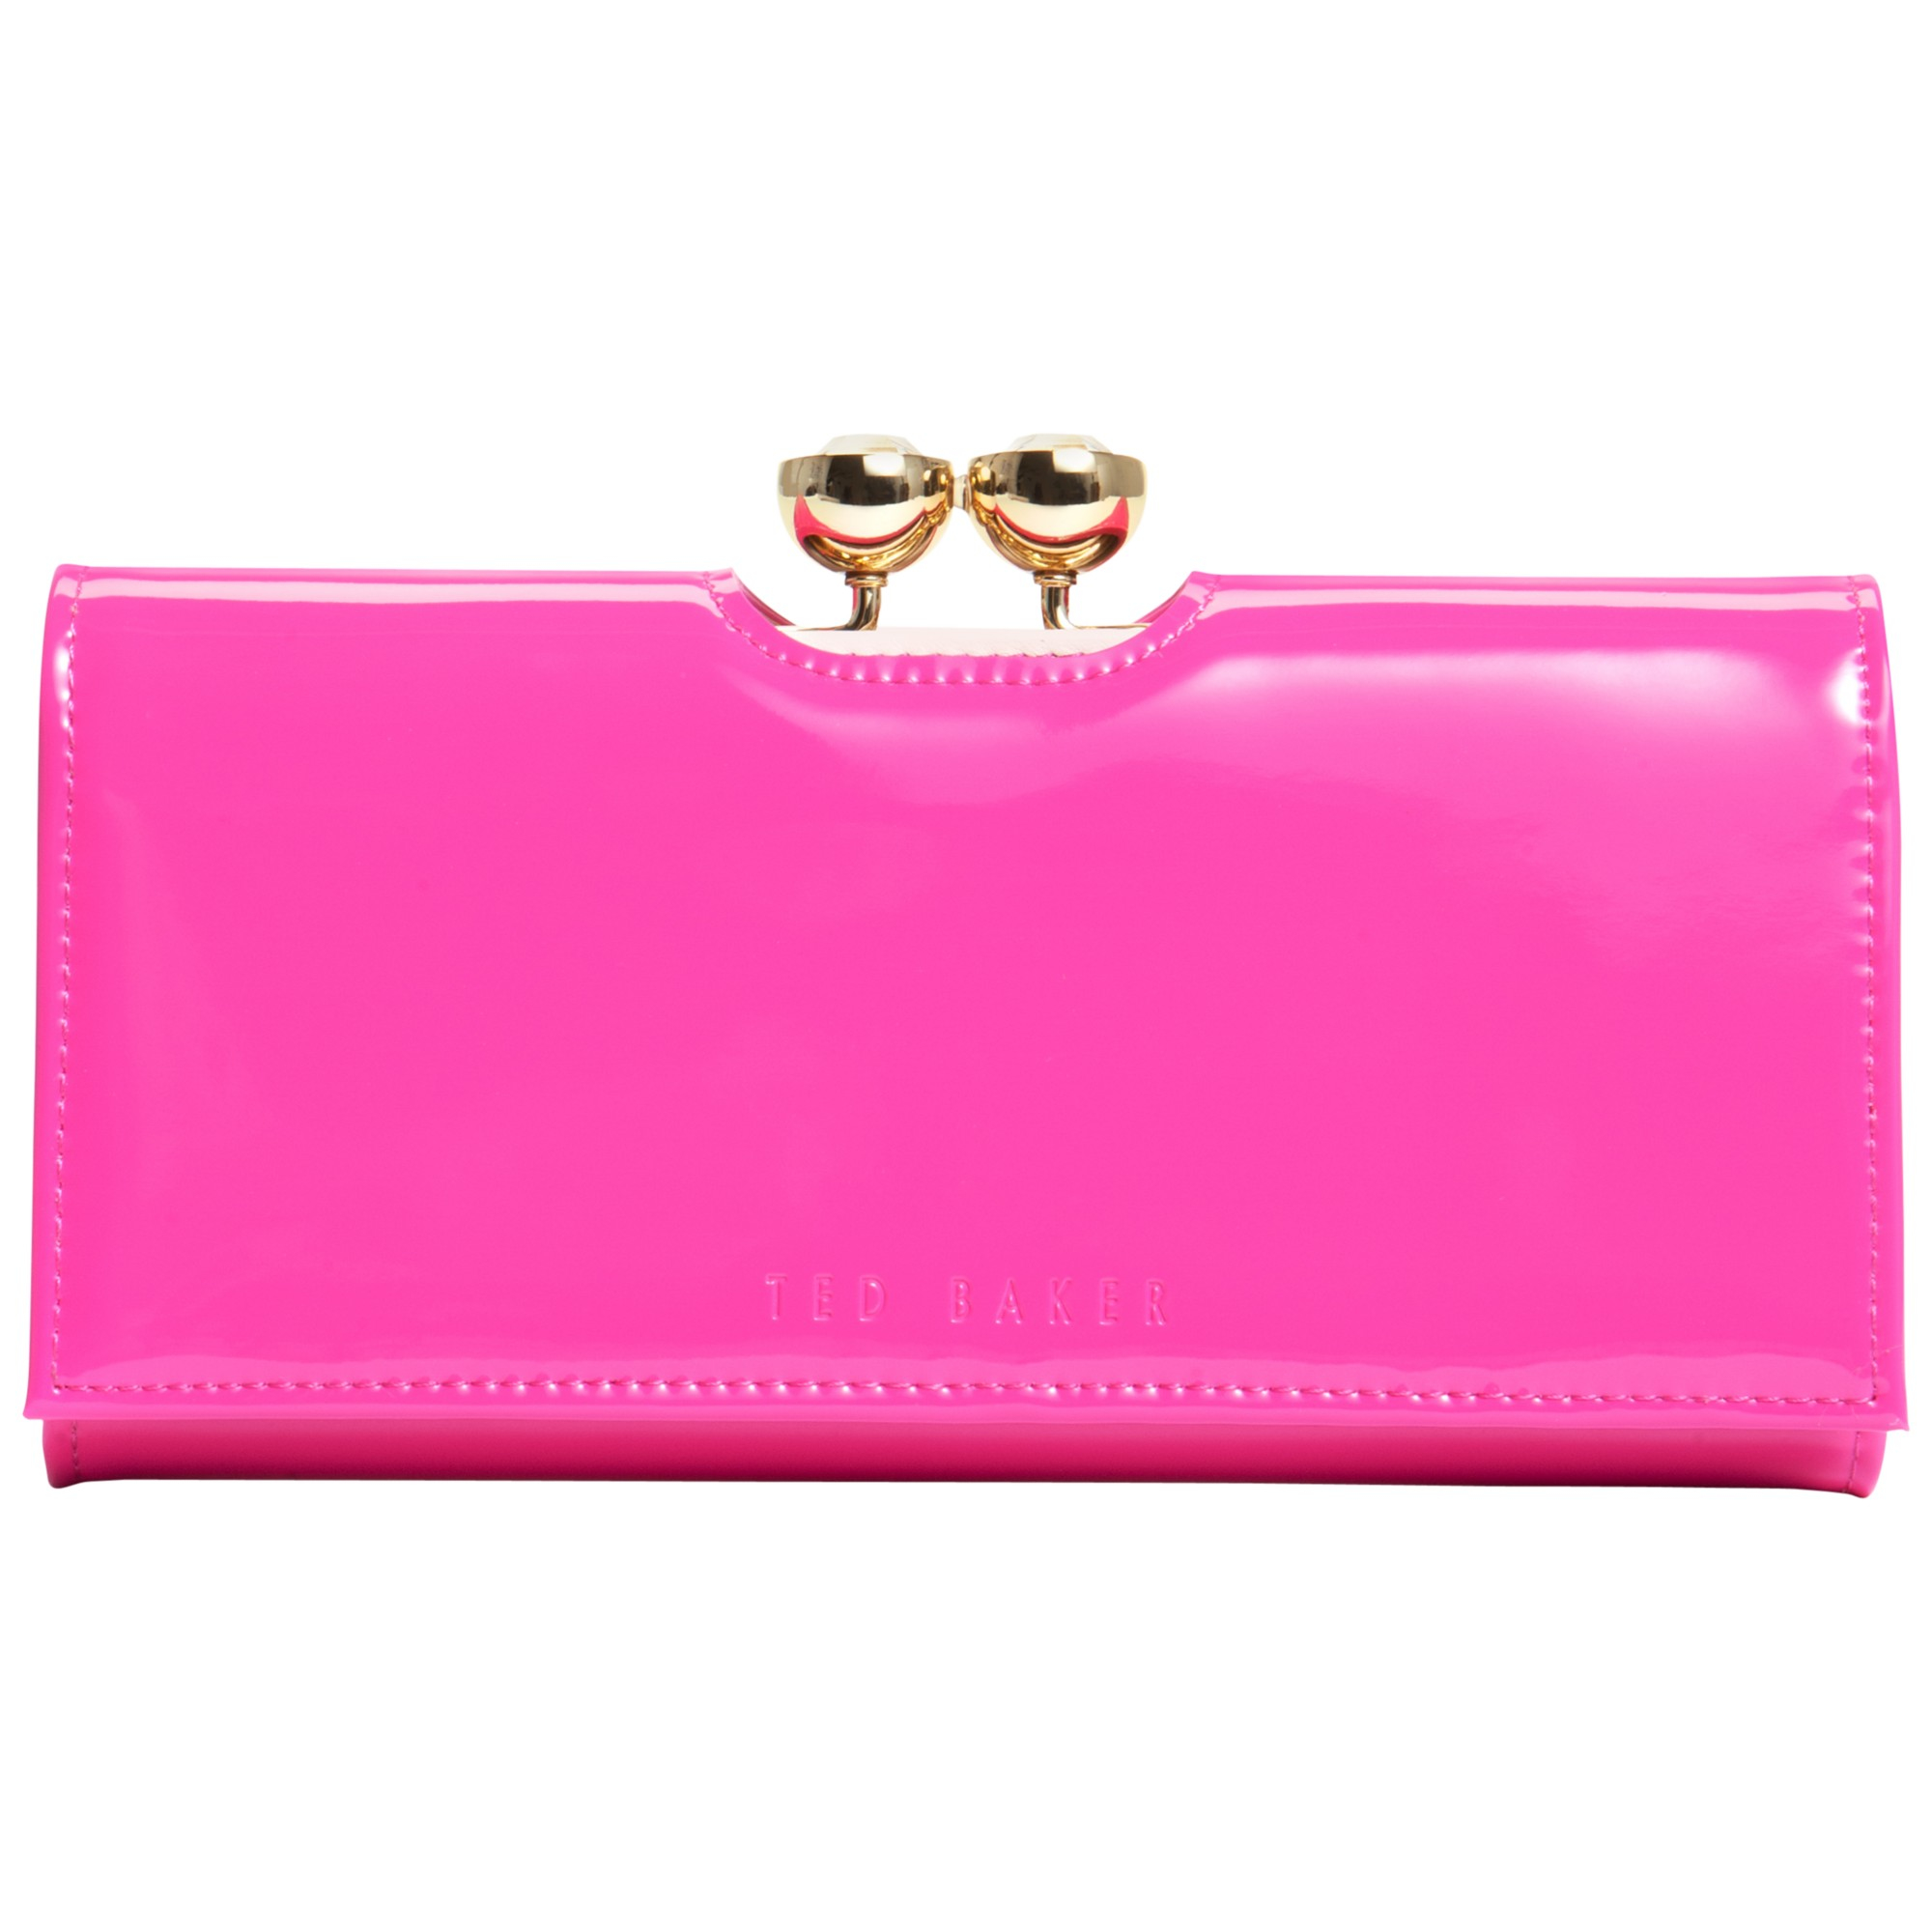 Ted Baker Kassady Crystal Bobble Leather Matinee Purse in Bright Pink ...